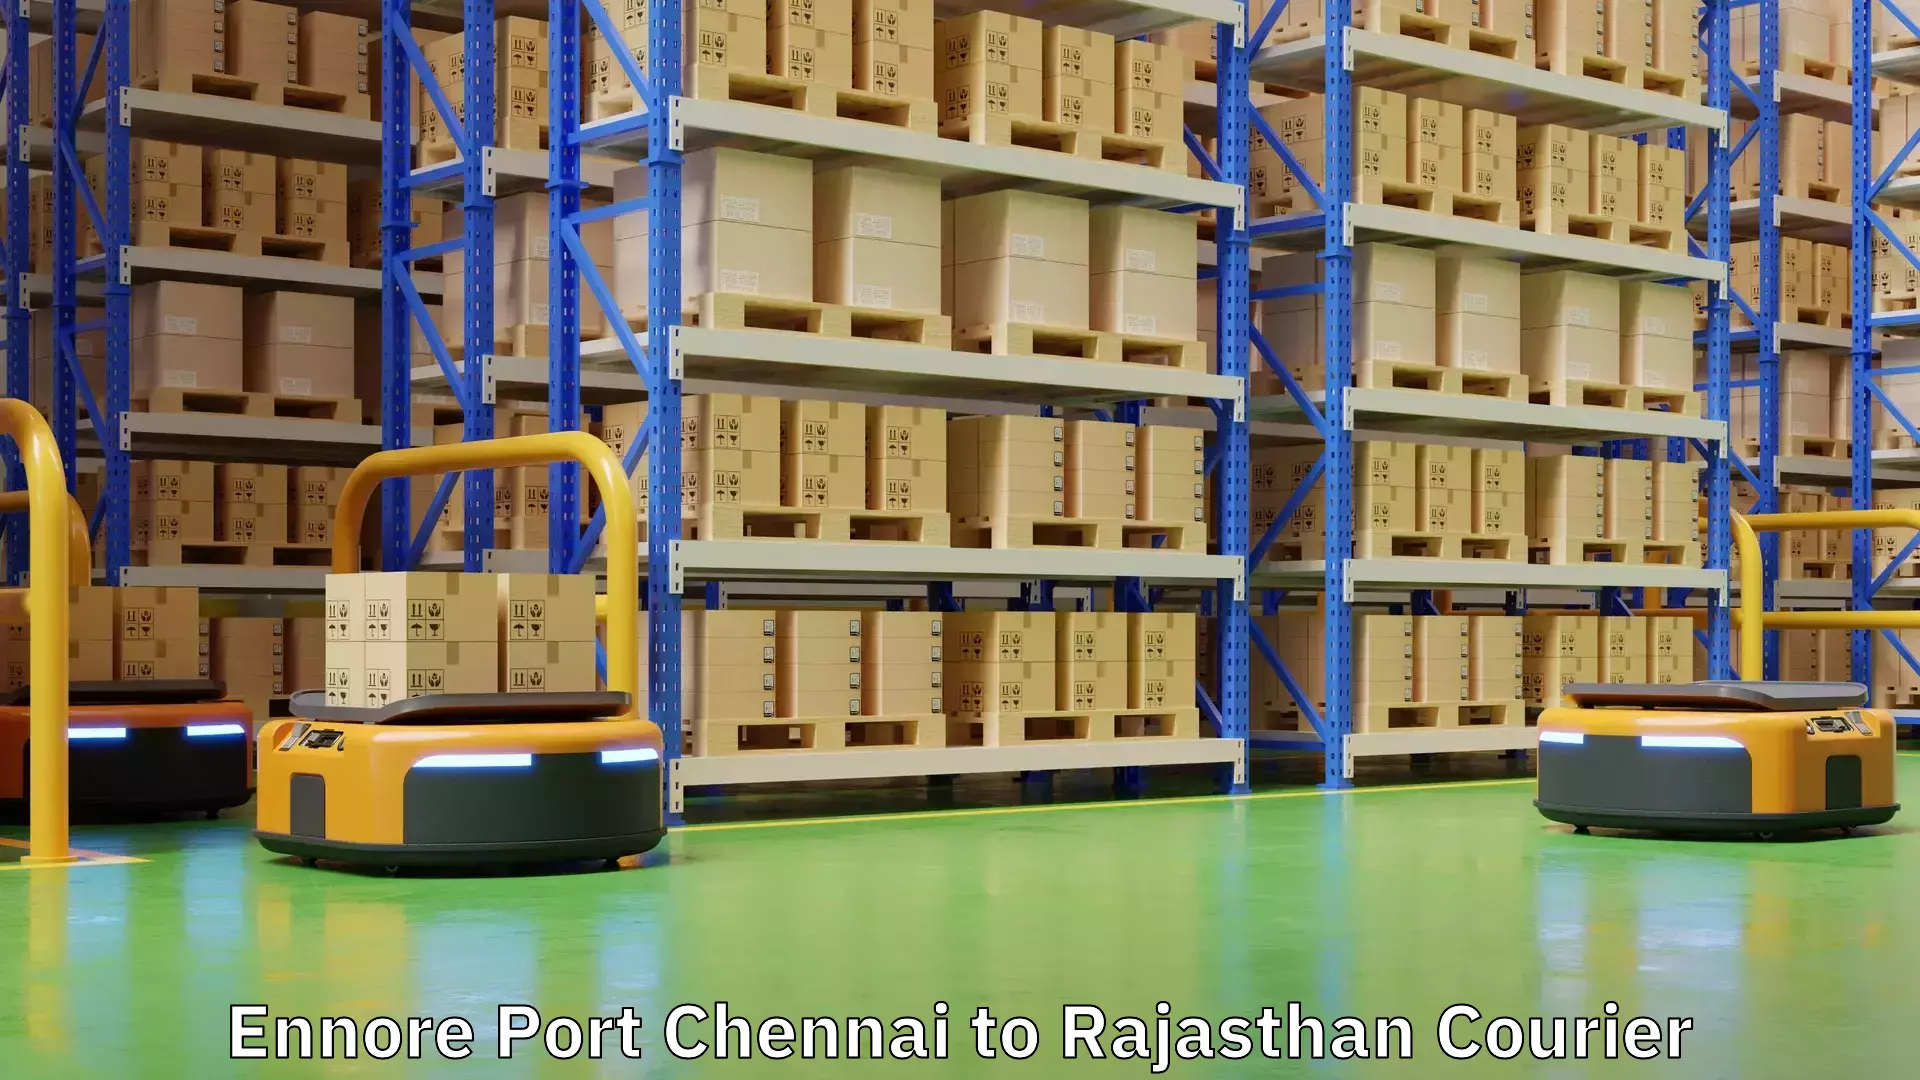 Customer-oriented courier services Ennore Port Chennai to Rajasthan